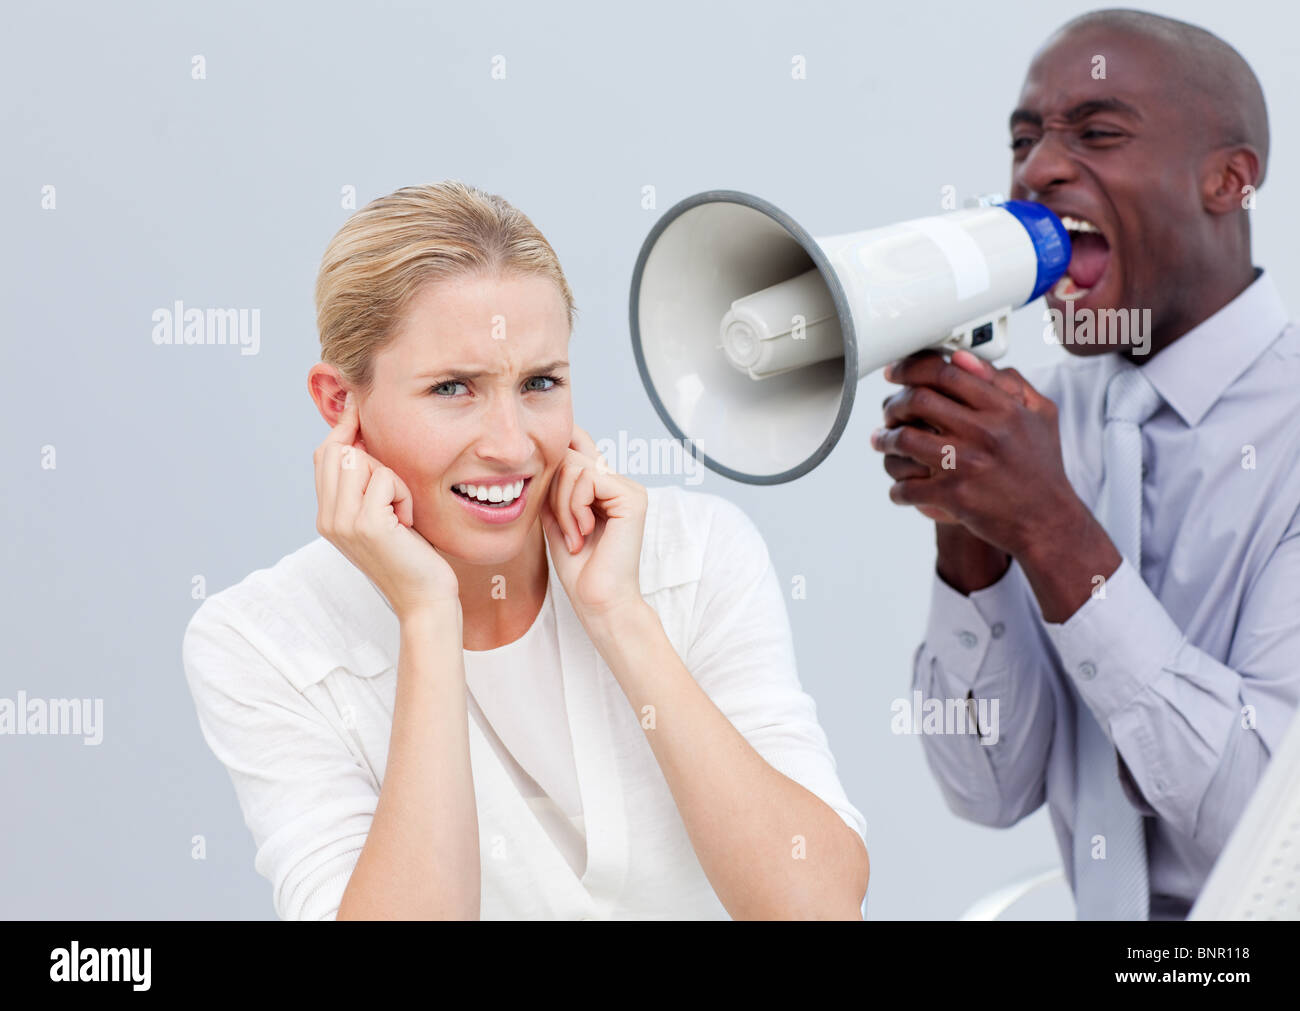 Angry businessman shouting through a megaphone Banque D'Images